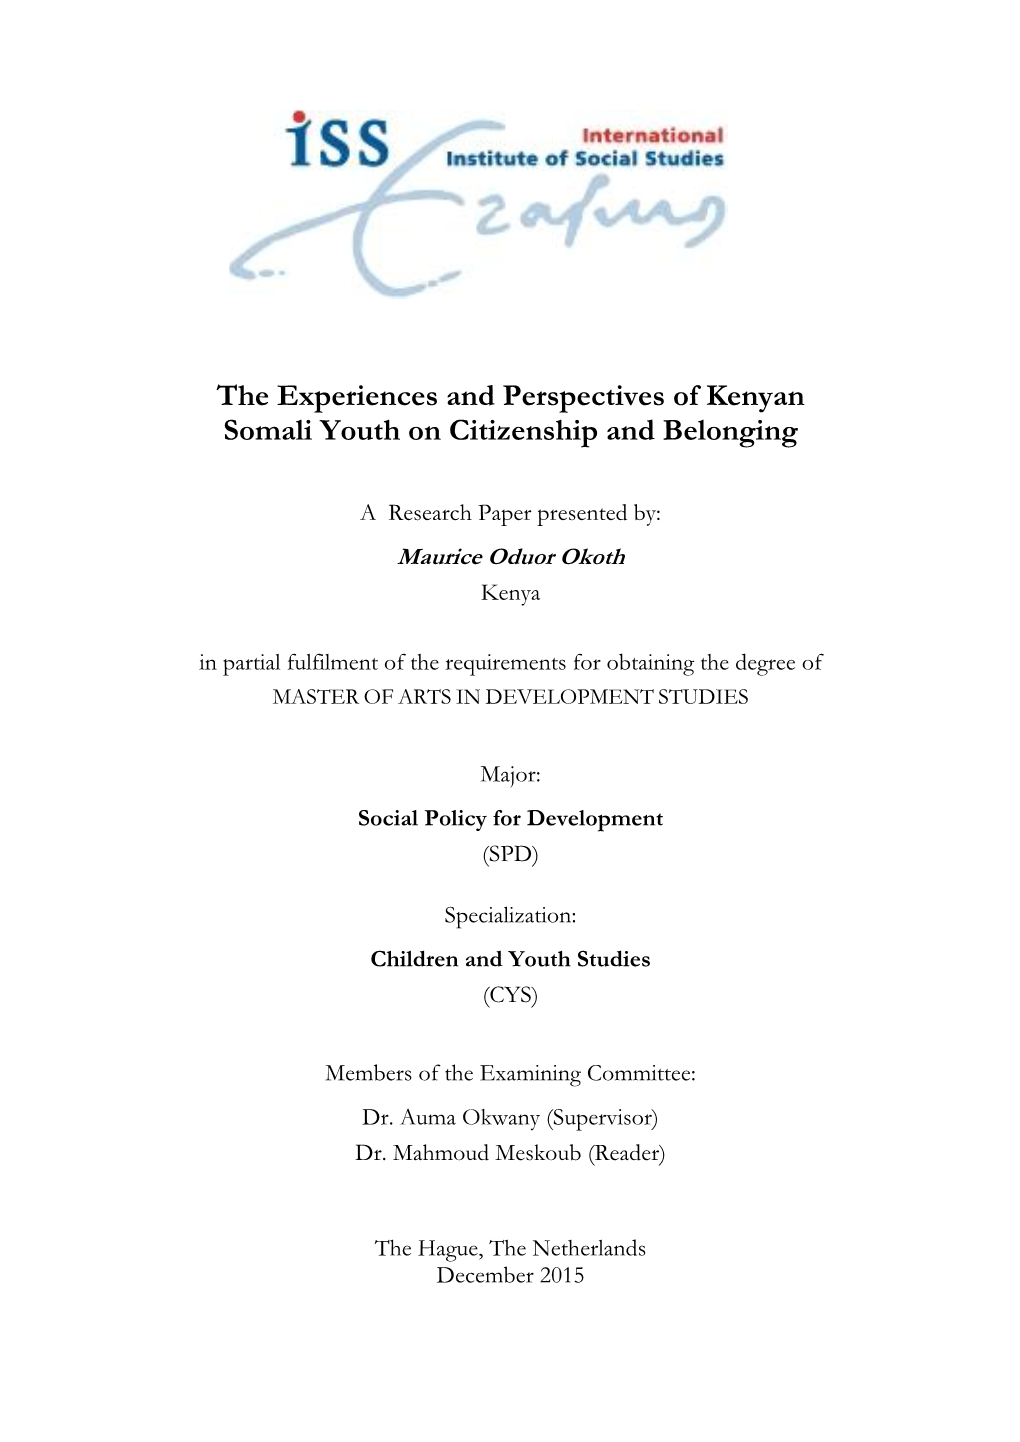 The Experiences and Perspectives of Kenyan Somali Youth on Citizenship and Belonging